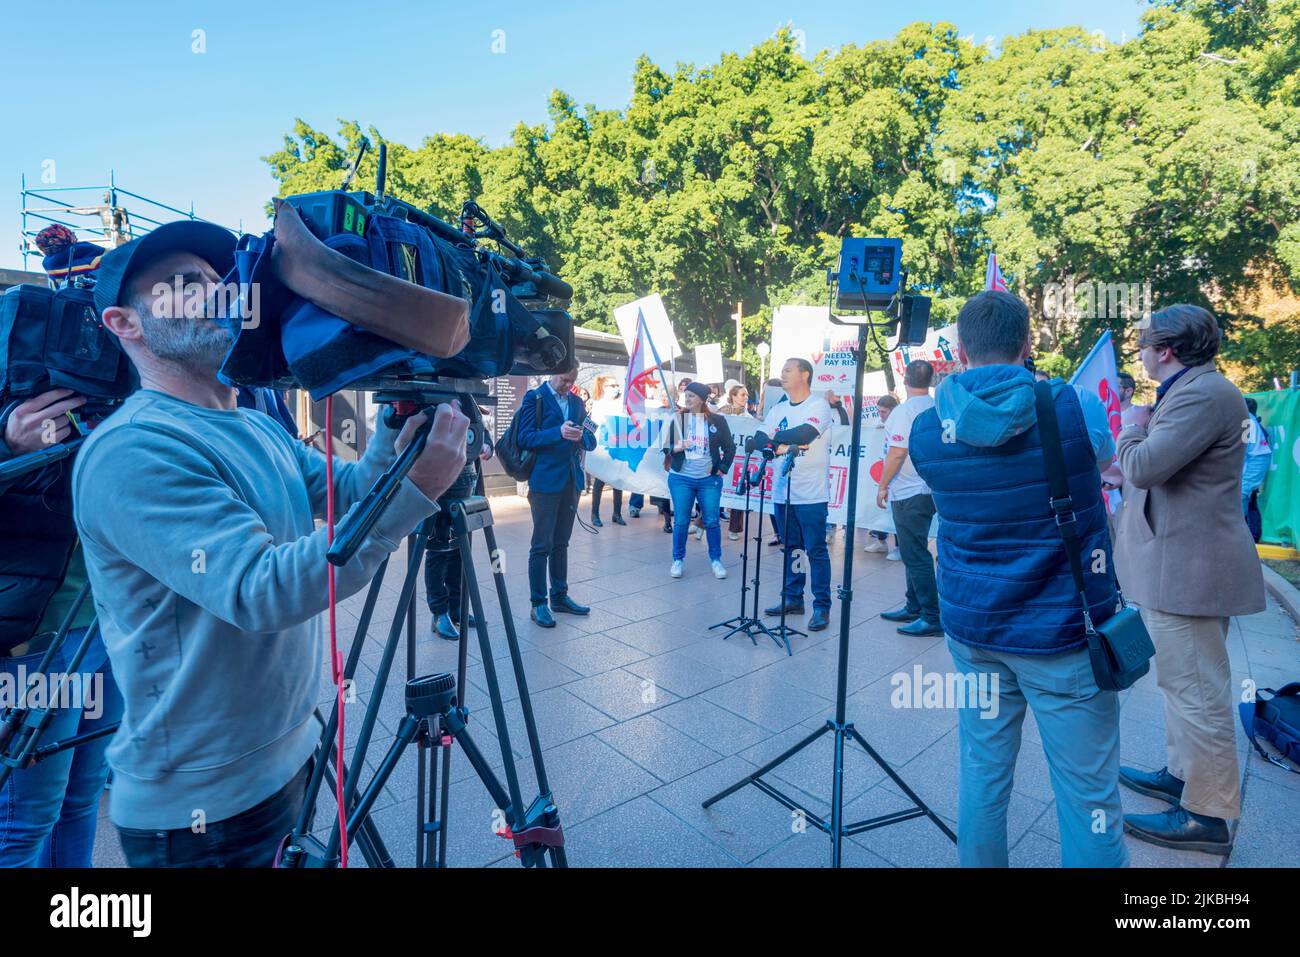 June 8th, 2022, Sydney, Australia: Cameramen and reporters prepare for a news conference with leaders of the New South Wales Public Sector Unions Stock Photo